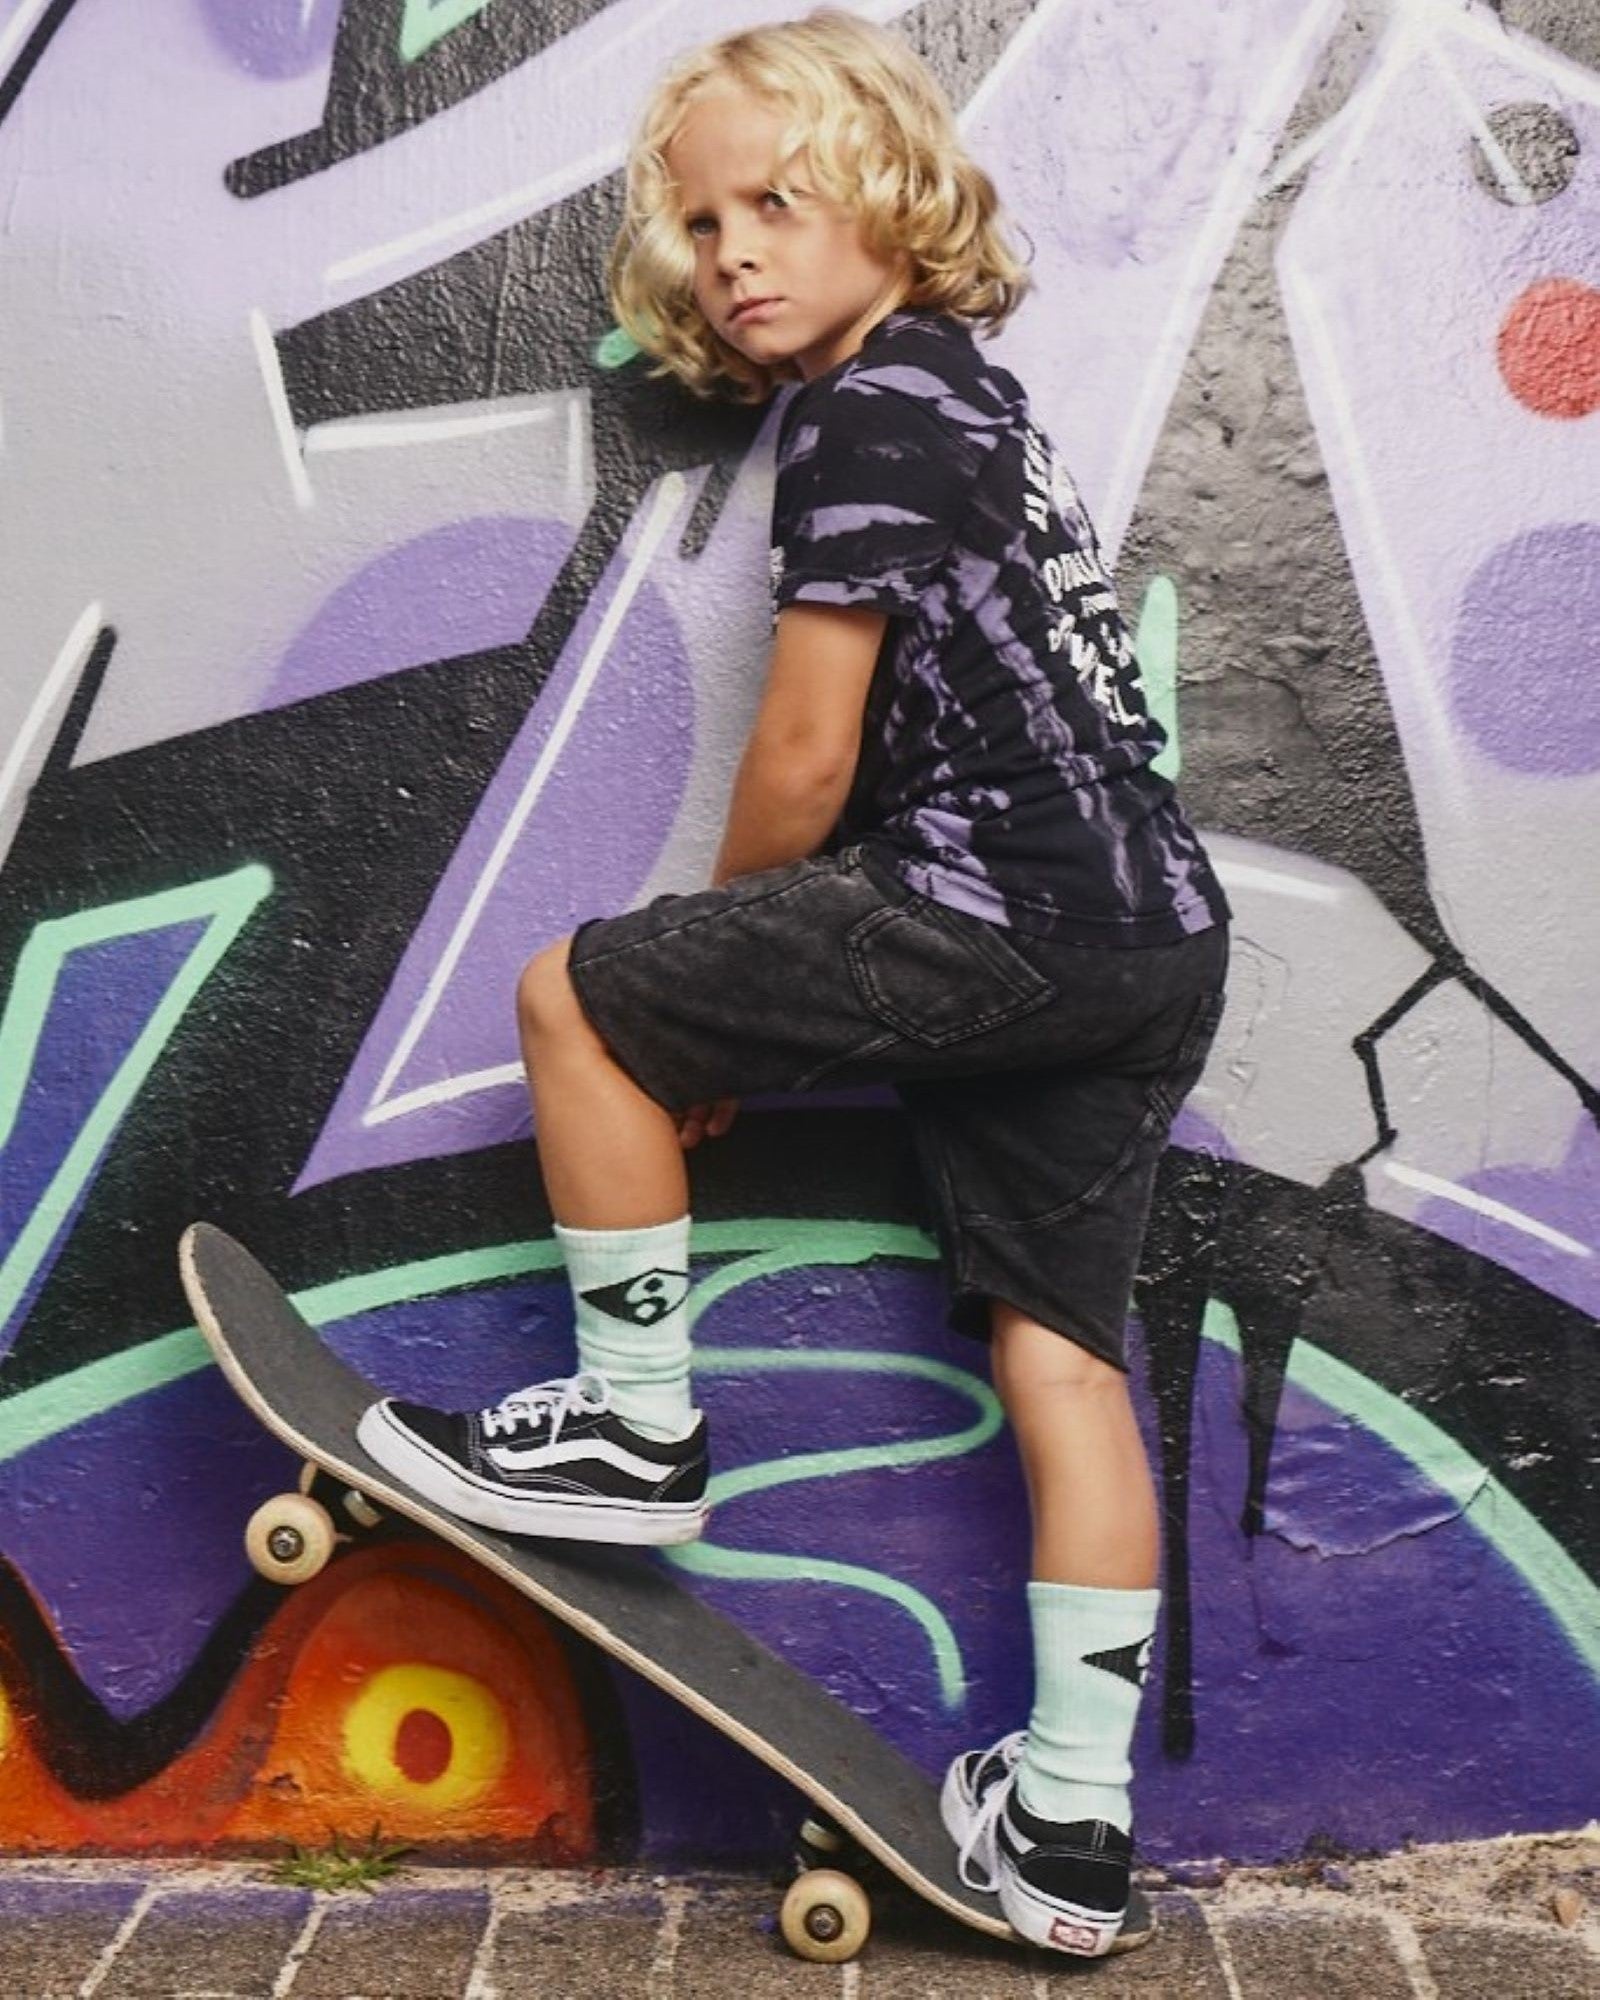 Kids Stacked Short from Alphabet Soup for boys aged 2-7. Featuring heavy-weight cotton, elastic waist, adjustable drawcord, acid black wash, faux- fly, raw hem, pockets with back panel detail, embroidery front pocket and woven label back pocket.